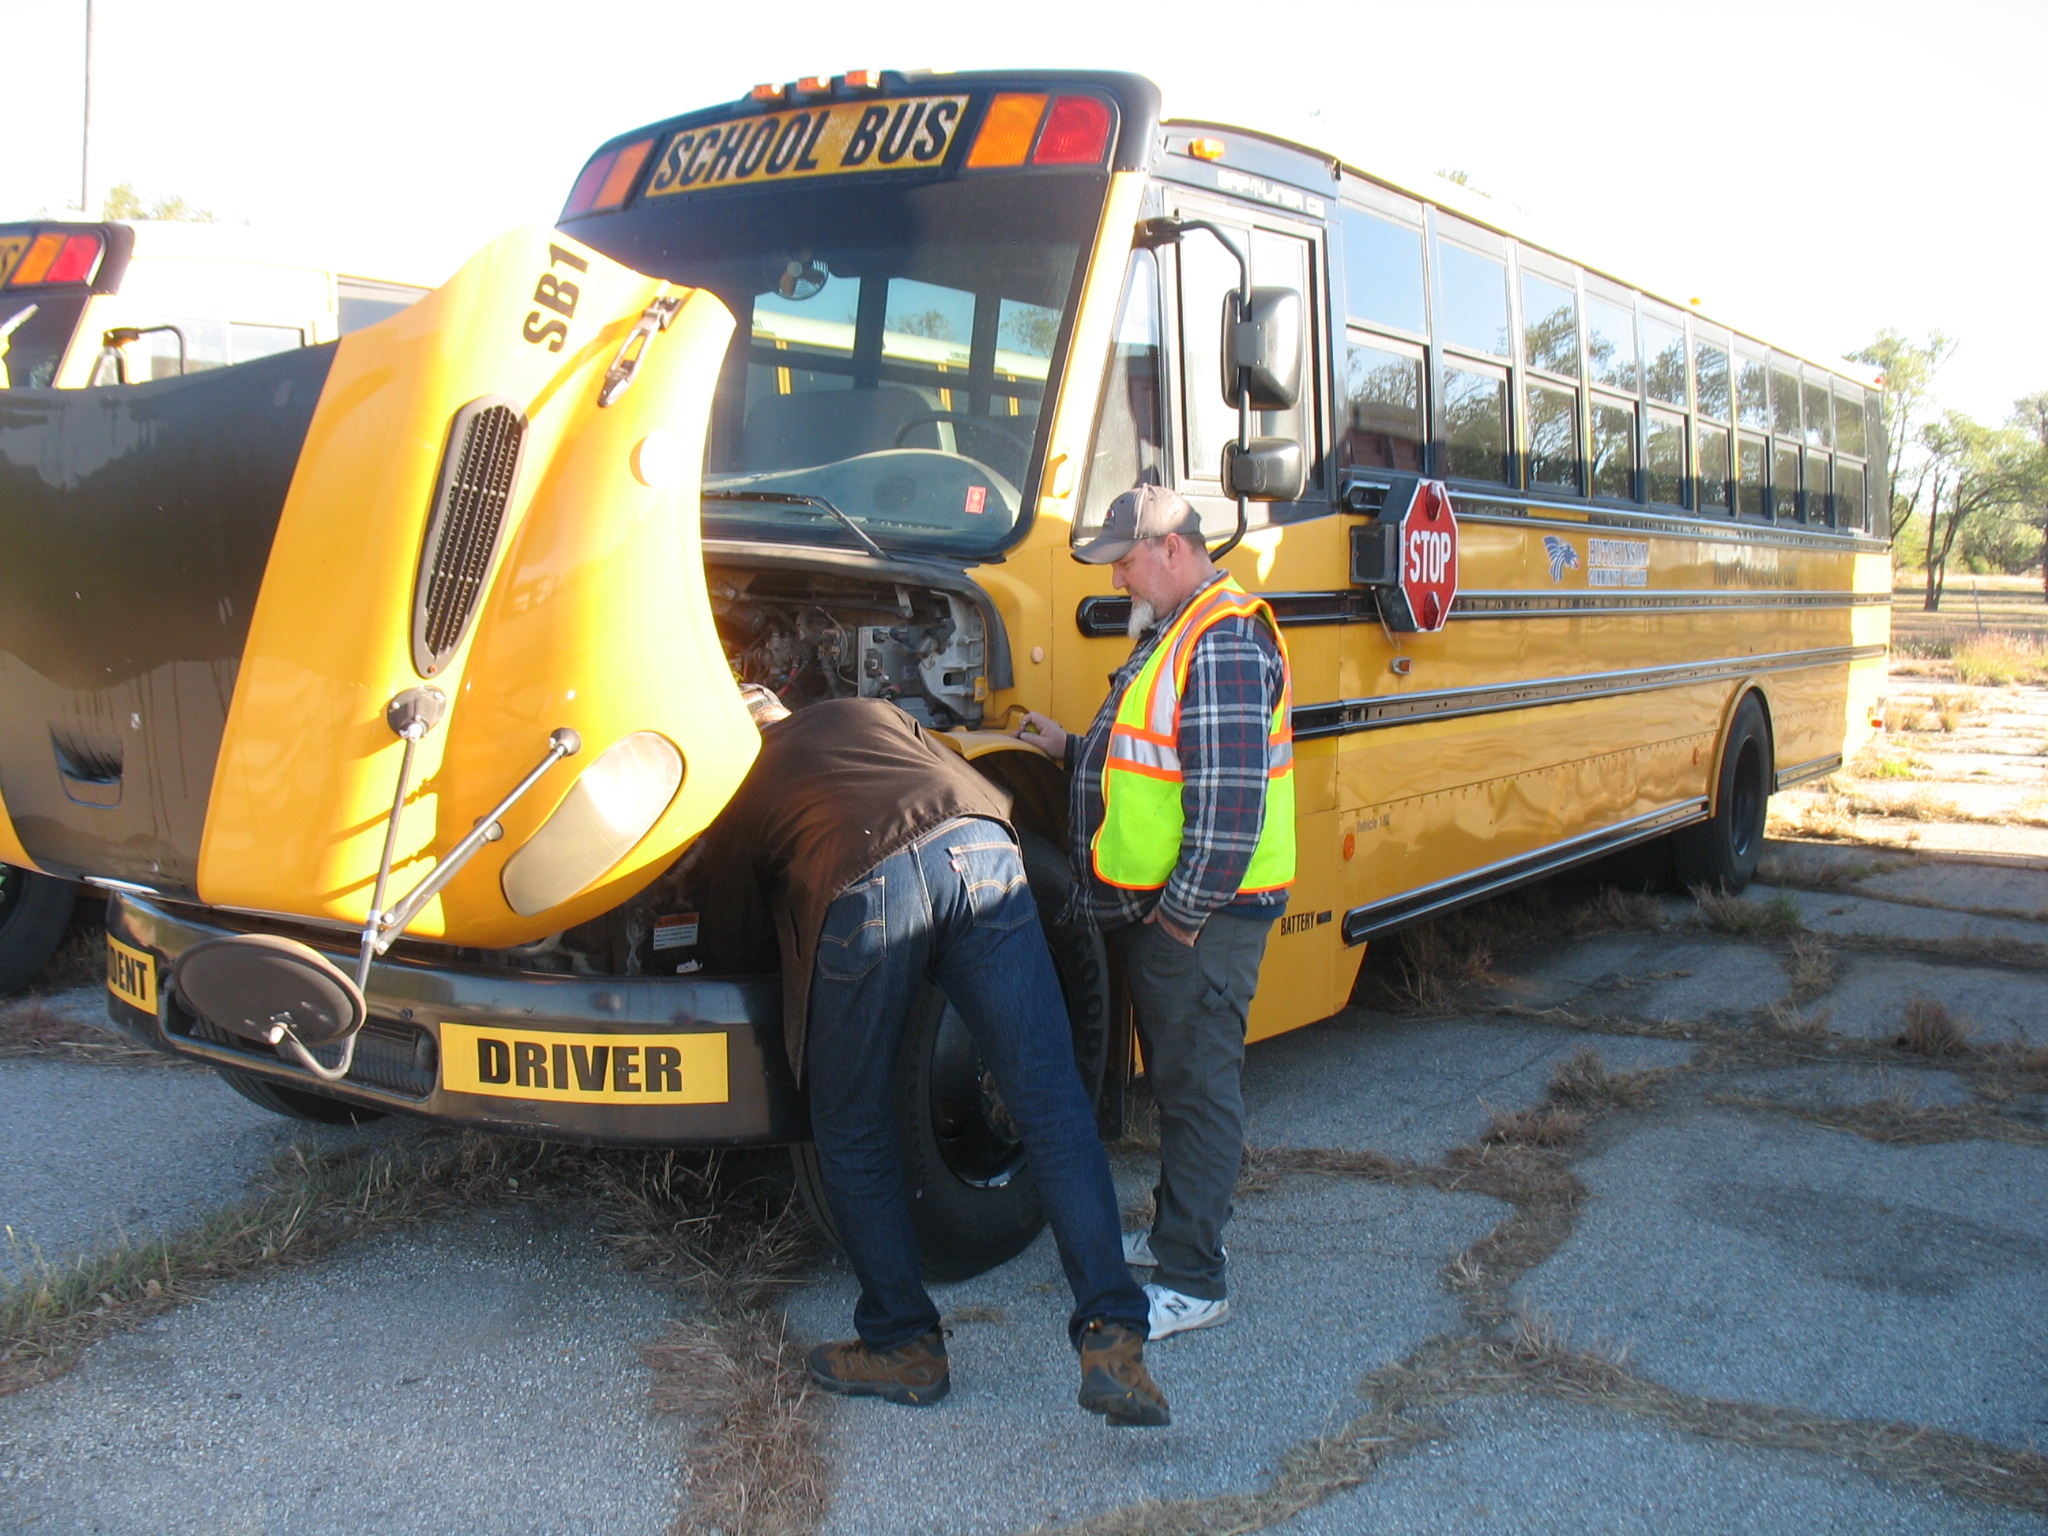 Donated bus from Durham School Services being used during a vehicle inspection training as part of Hutchinson’s CDL Training Program